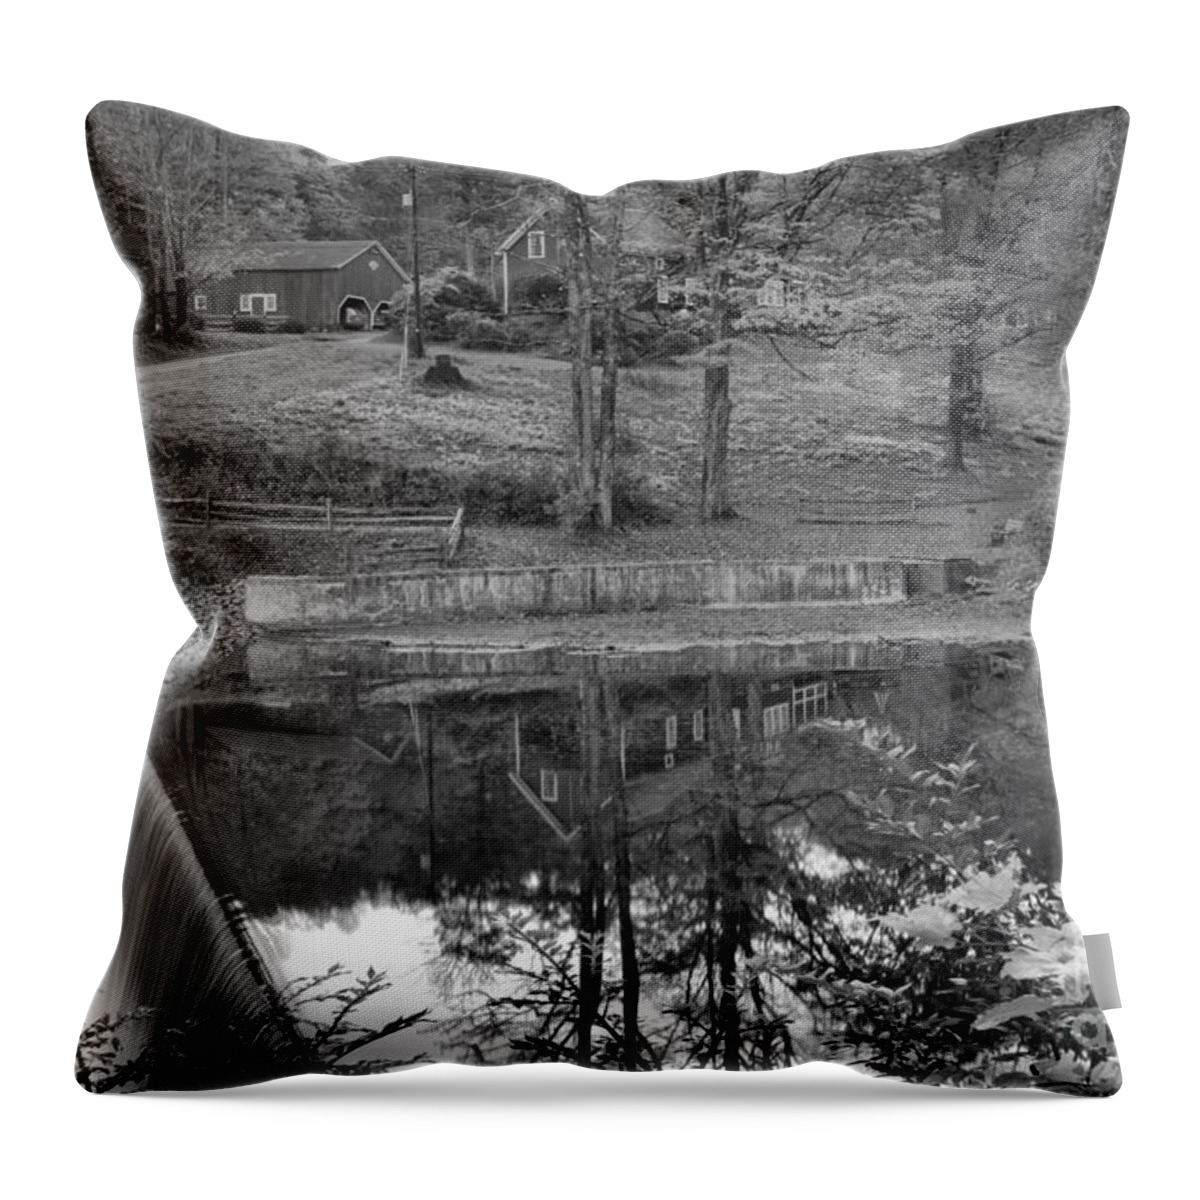 Towns Throw Pillow featuring the photograph Green River Village Fall Reflections Black And White by Adam Jewell